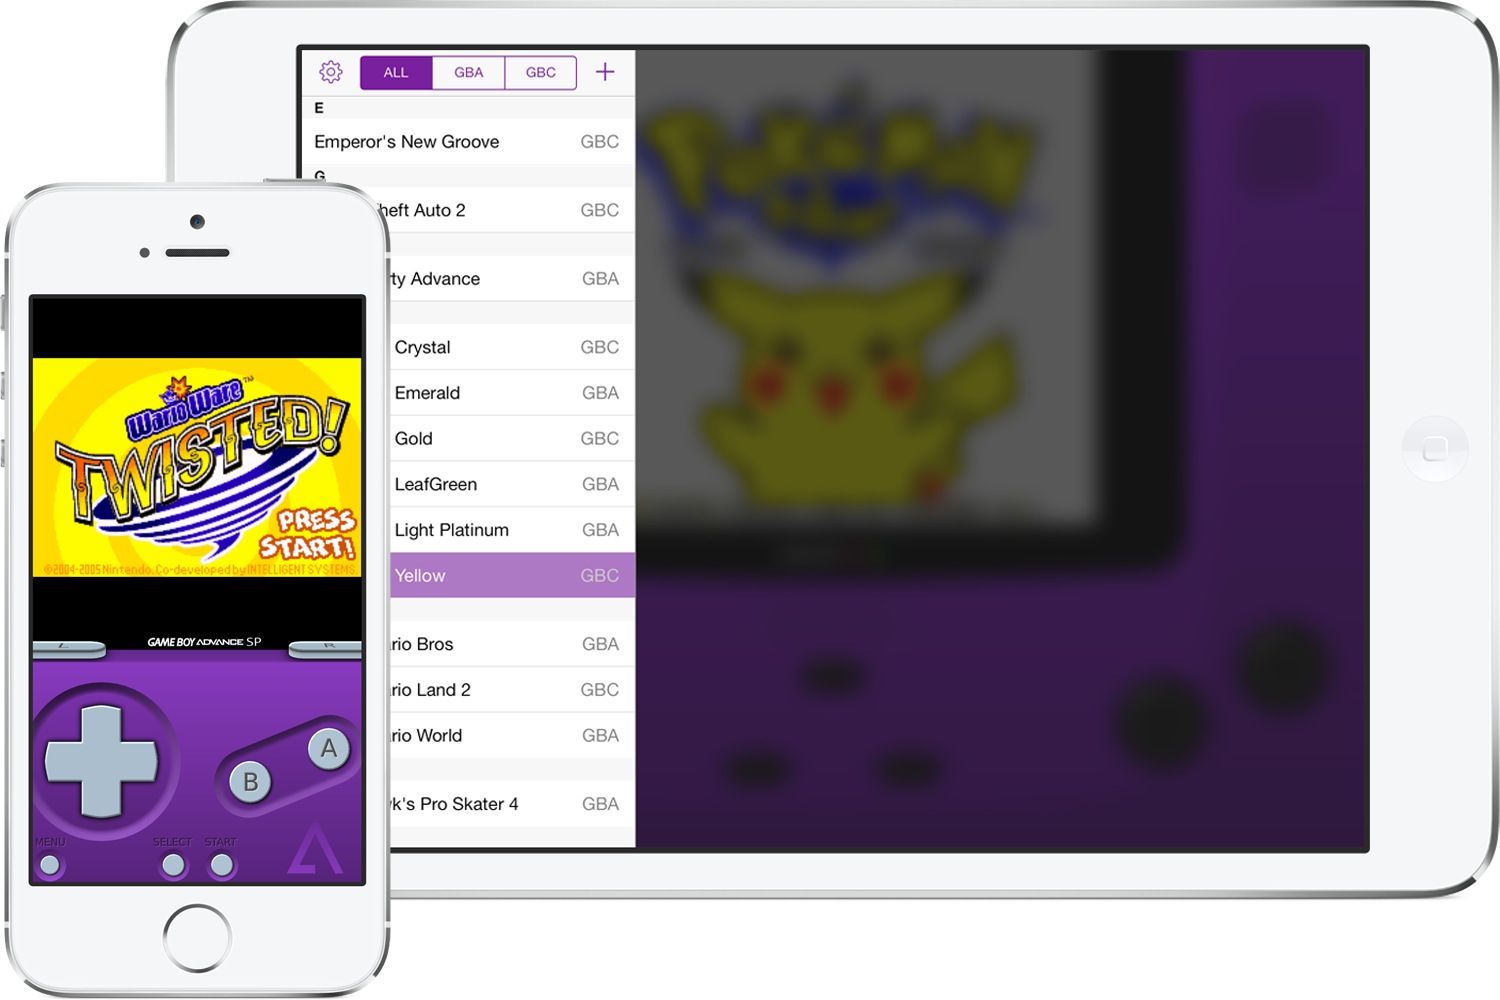 GBA emulator iPhone – Turn your latest iPhone into a GBA console